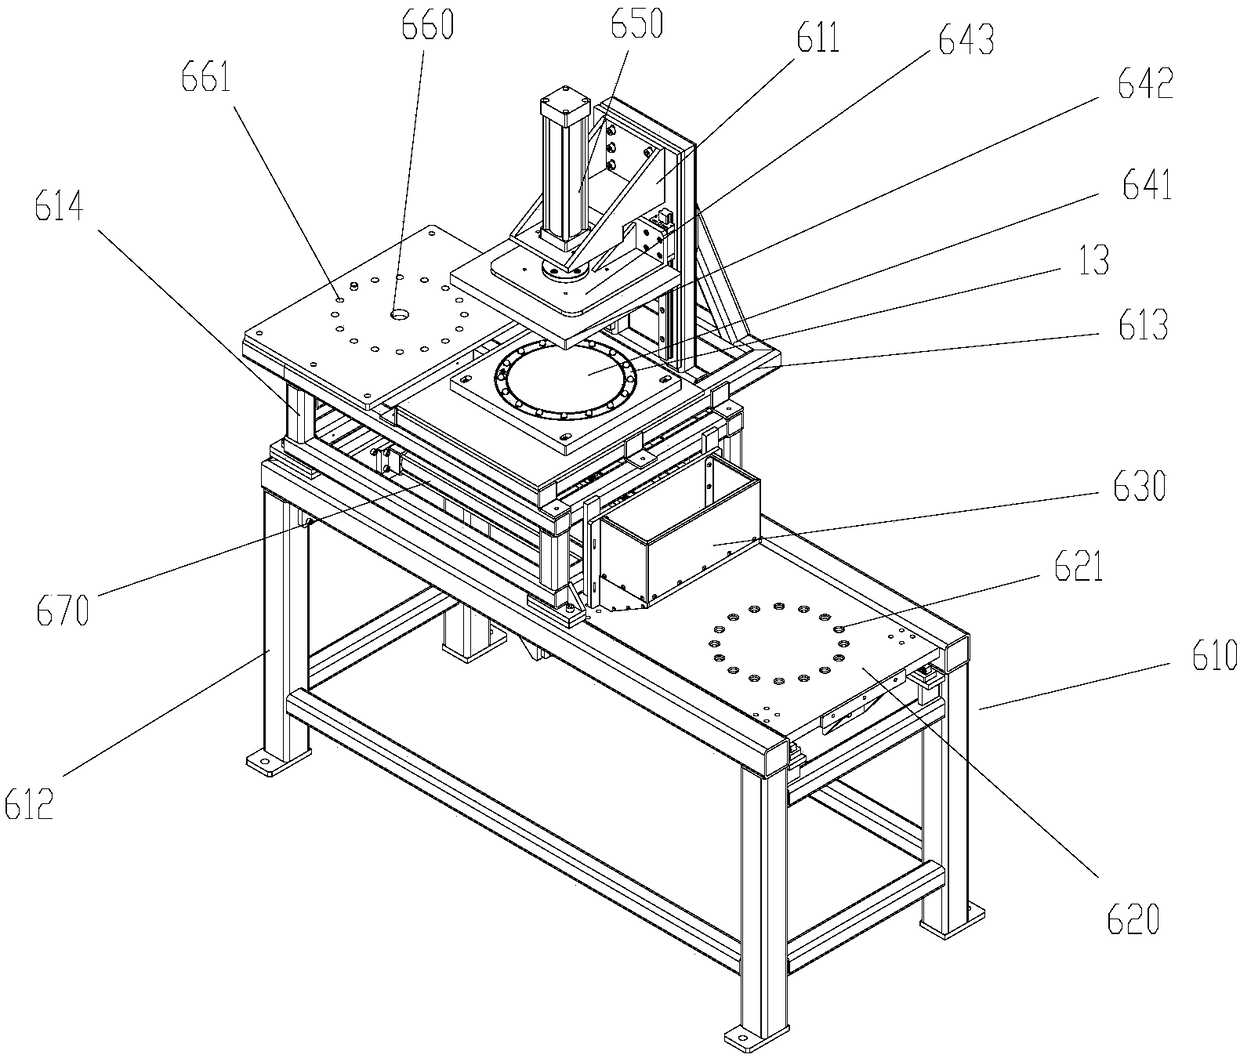 Rolling ball assembly tooling and bearing assembly equipment with rolling ball assembly tooling